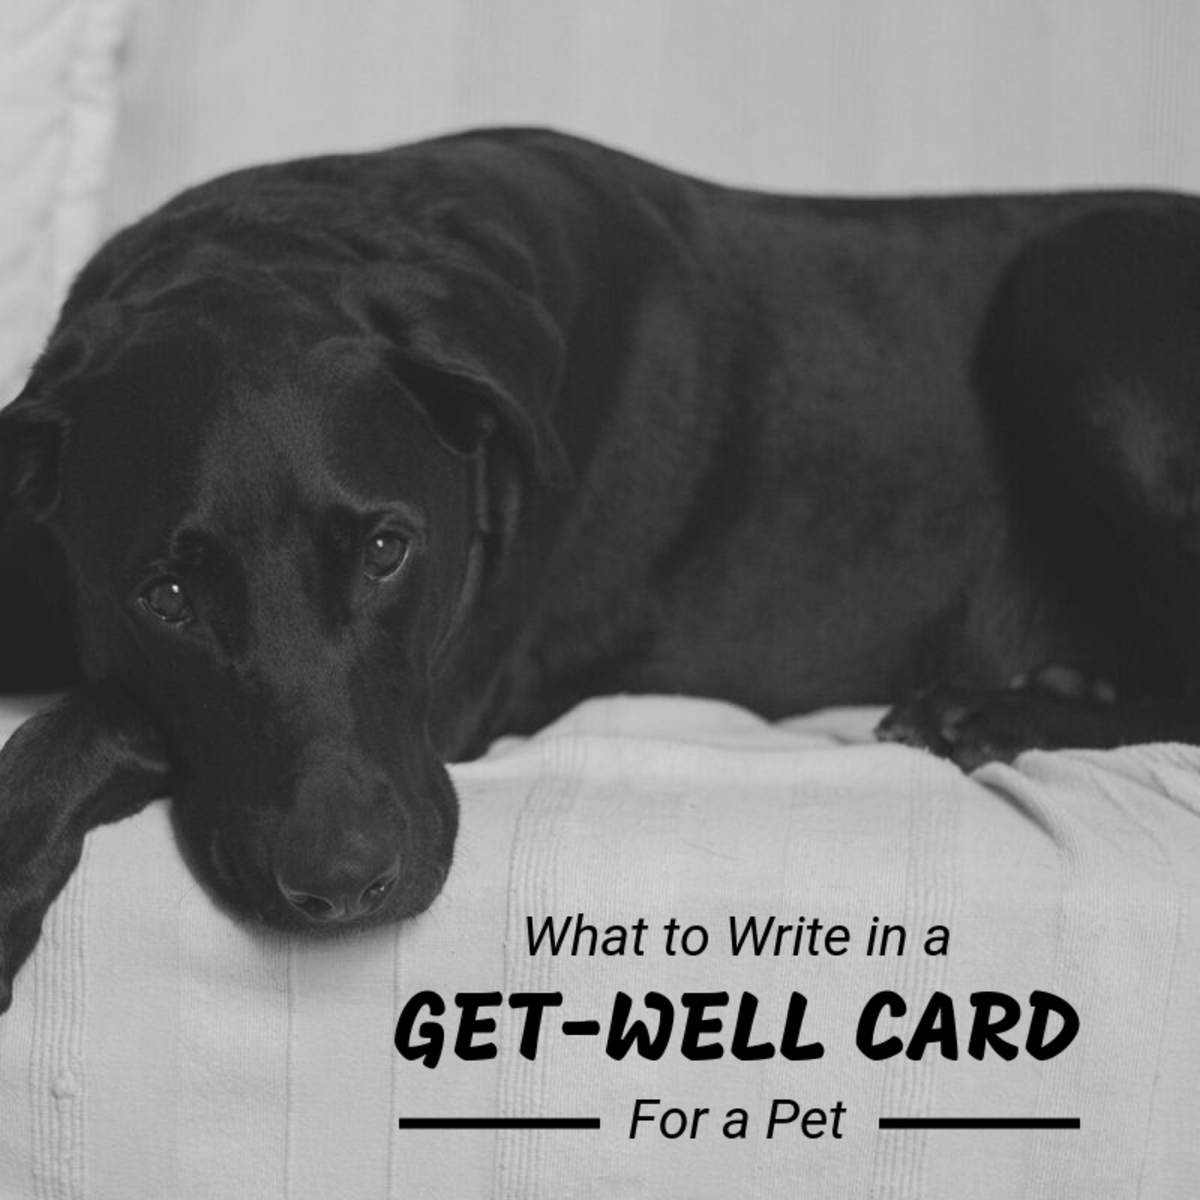 What to Write in a Get-Well Card for a Pet